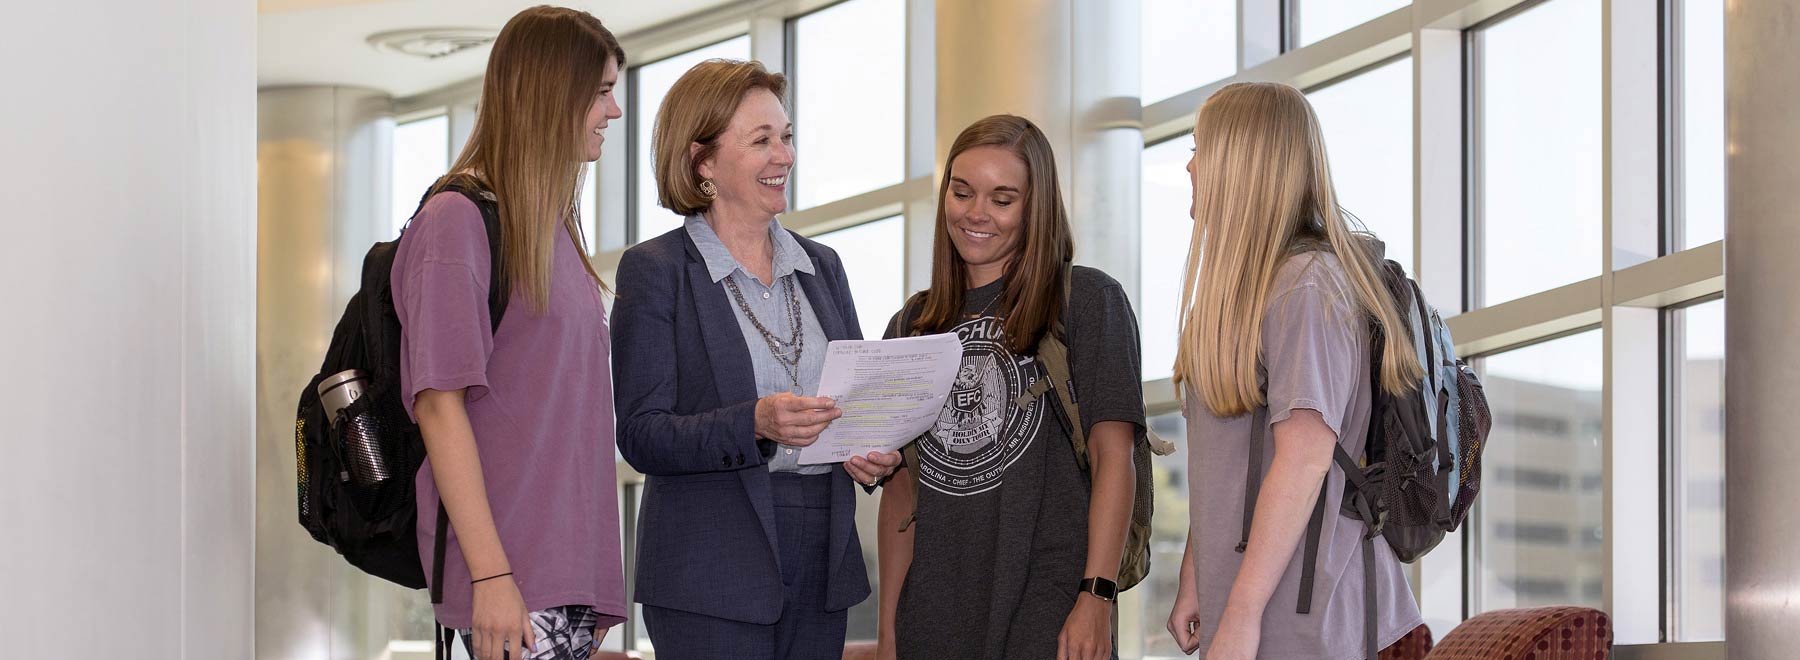 Dean Jessica Bailey meets with students at the School of Health Related Professions